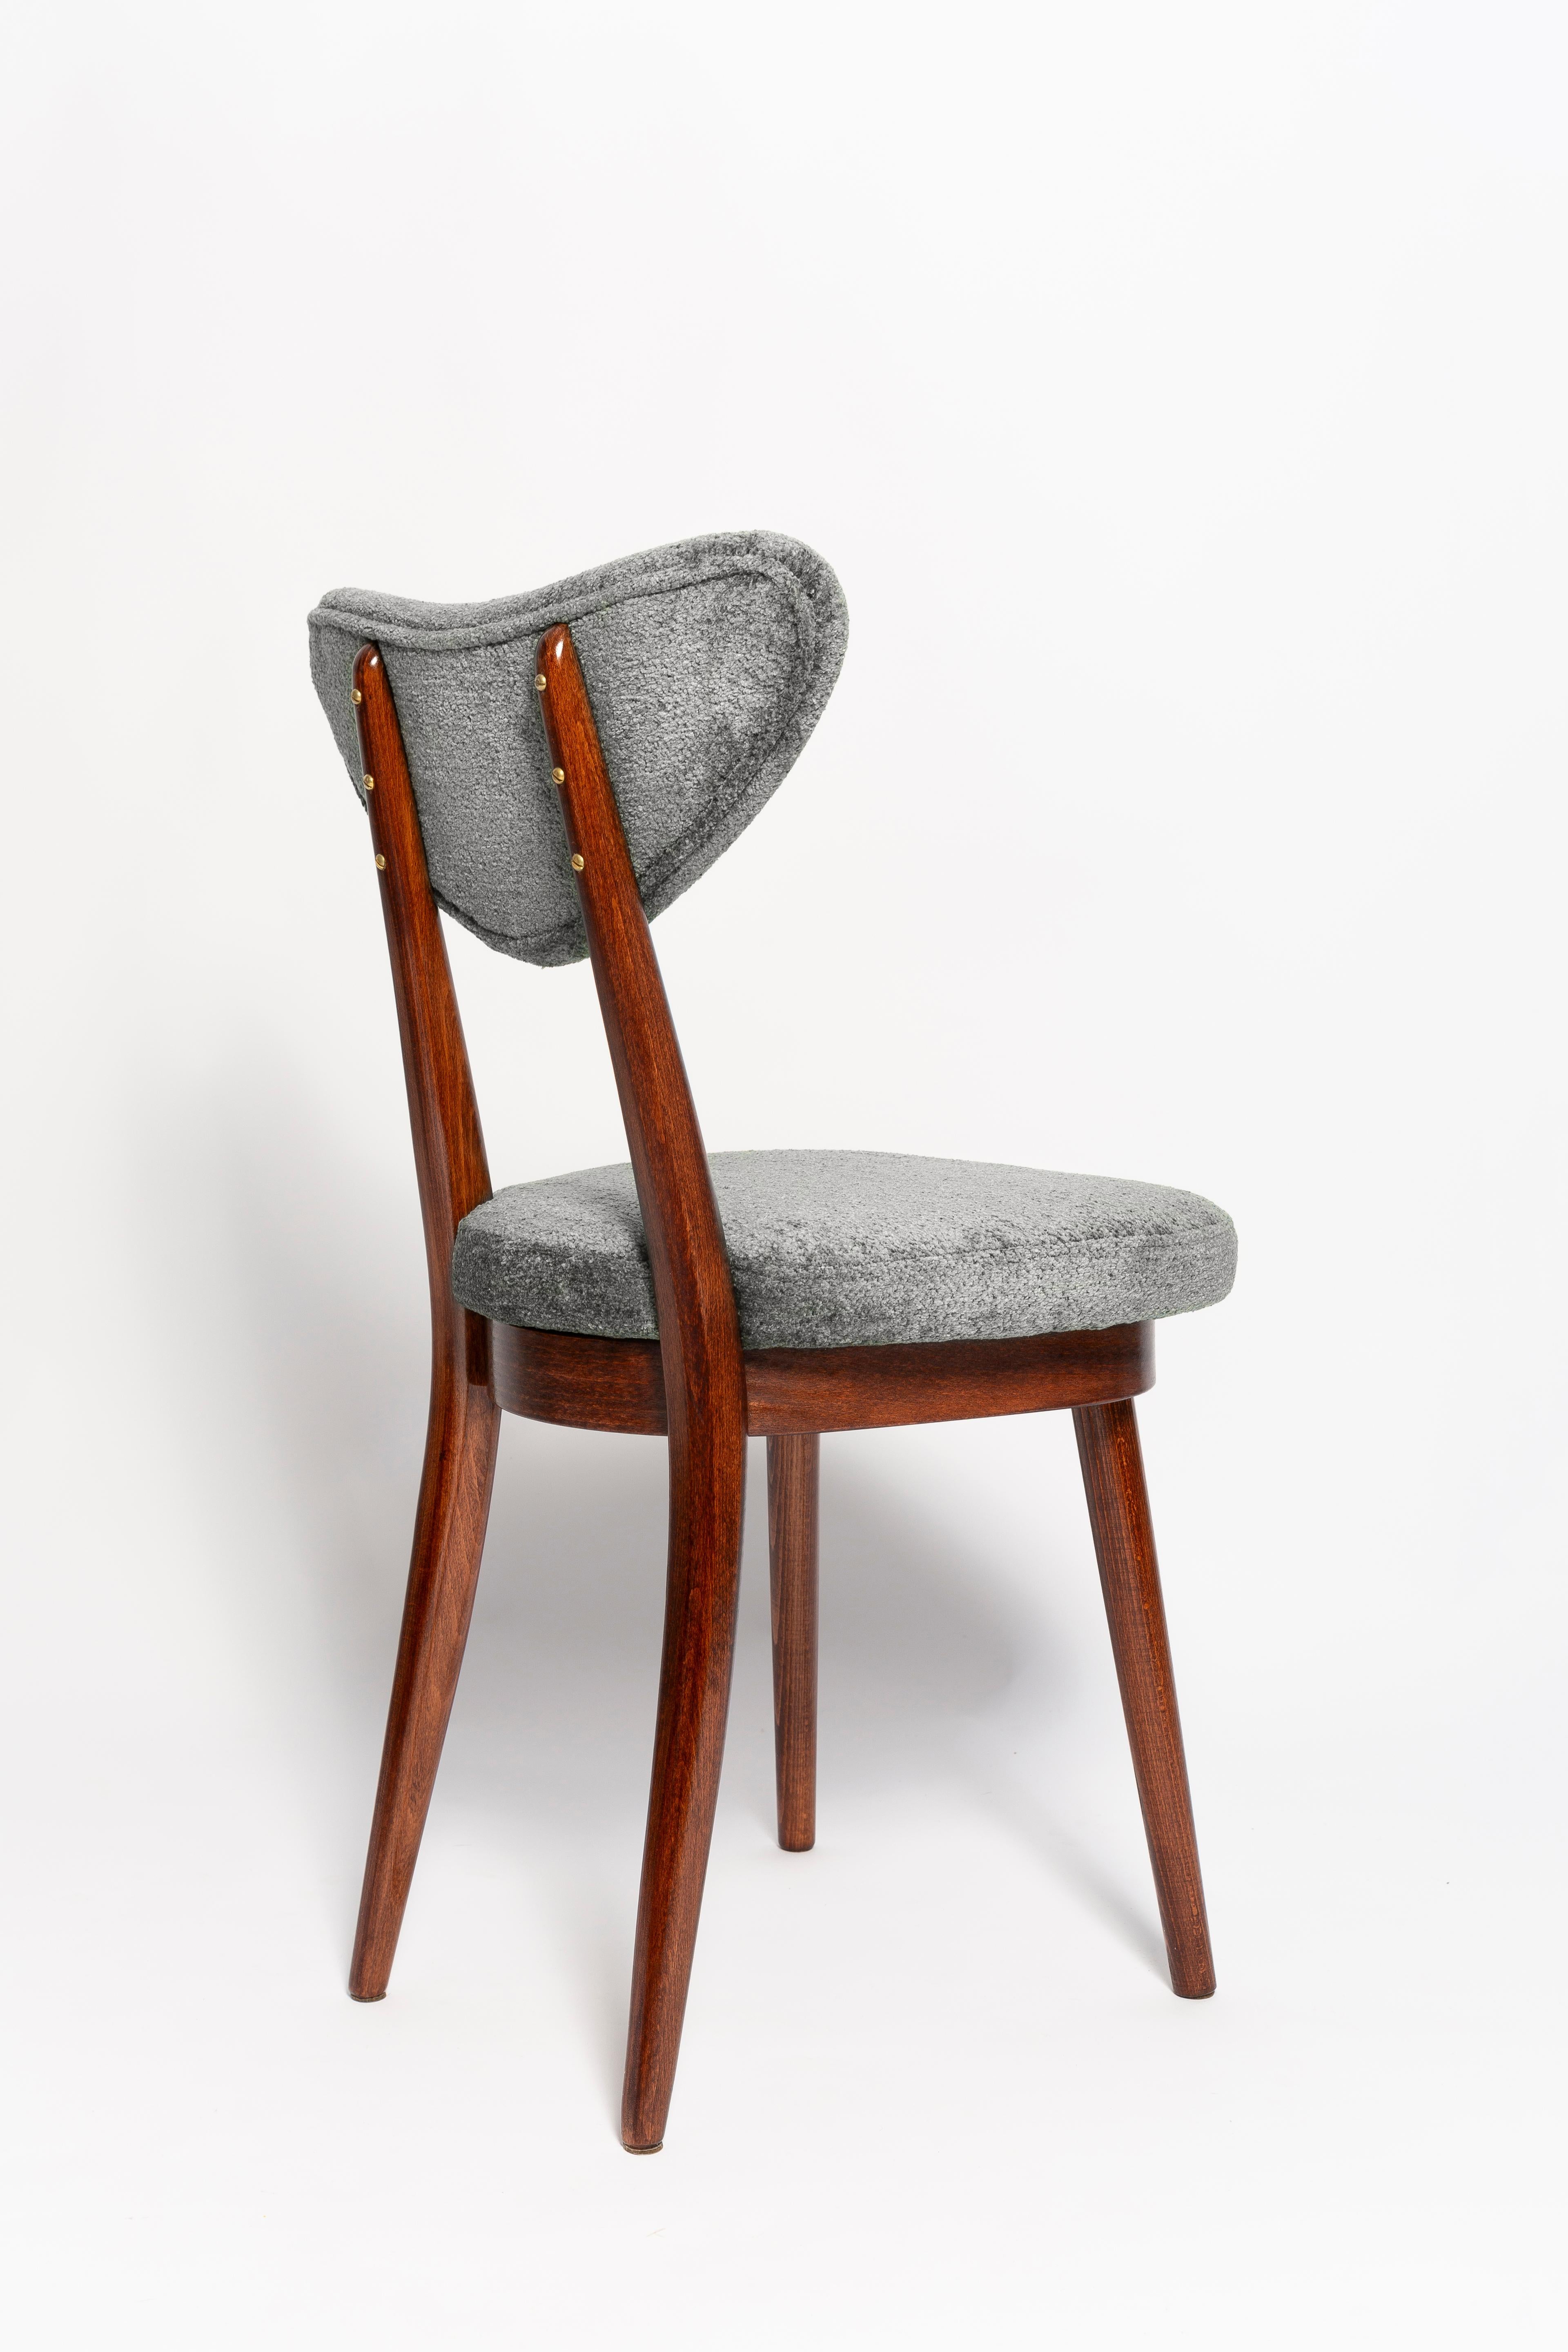 Mid Century Heart Chair and Stool, Gray Velvet, Dark Wood, Europe 1960s In Excellent Condition For Sale In 05-080 Hornowek, PL